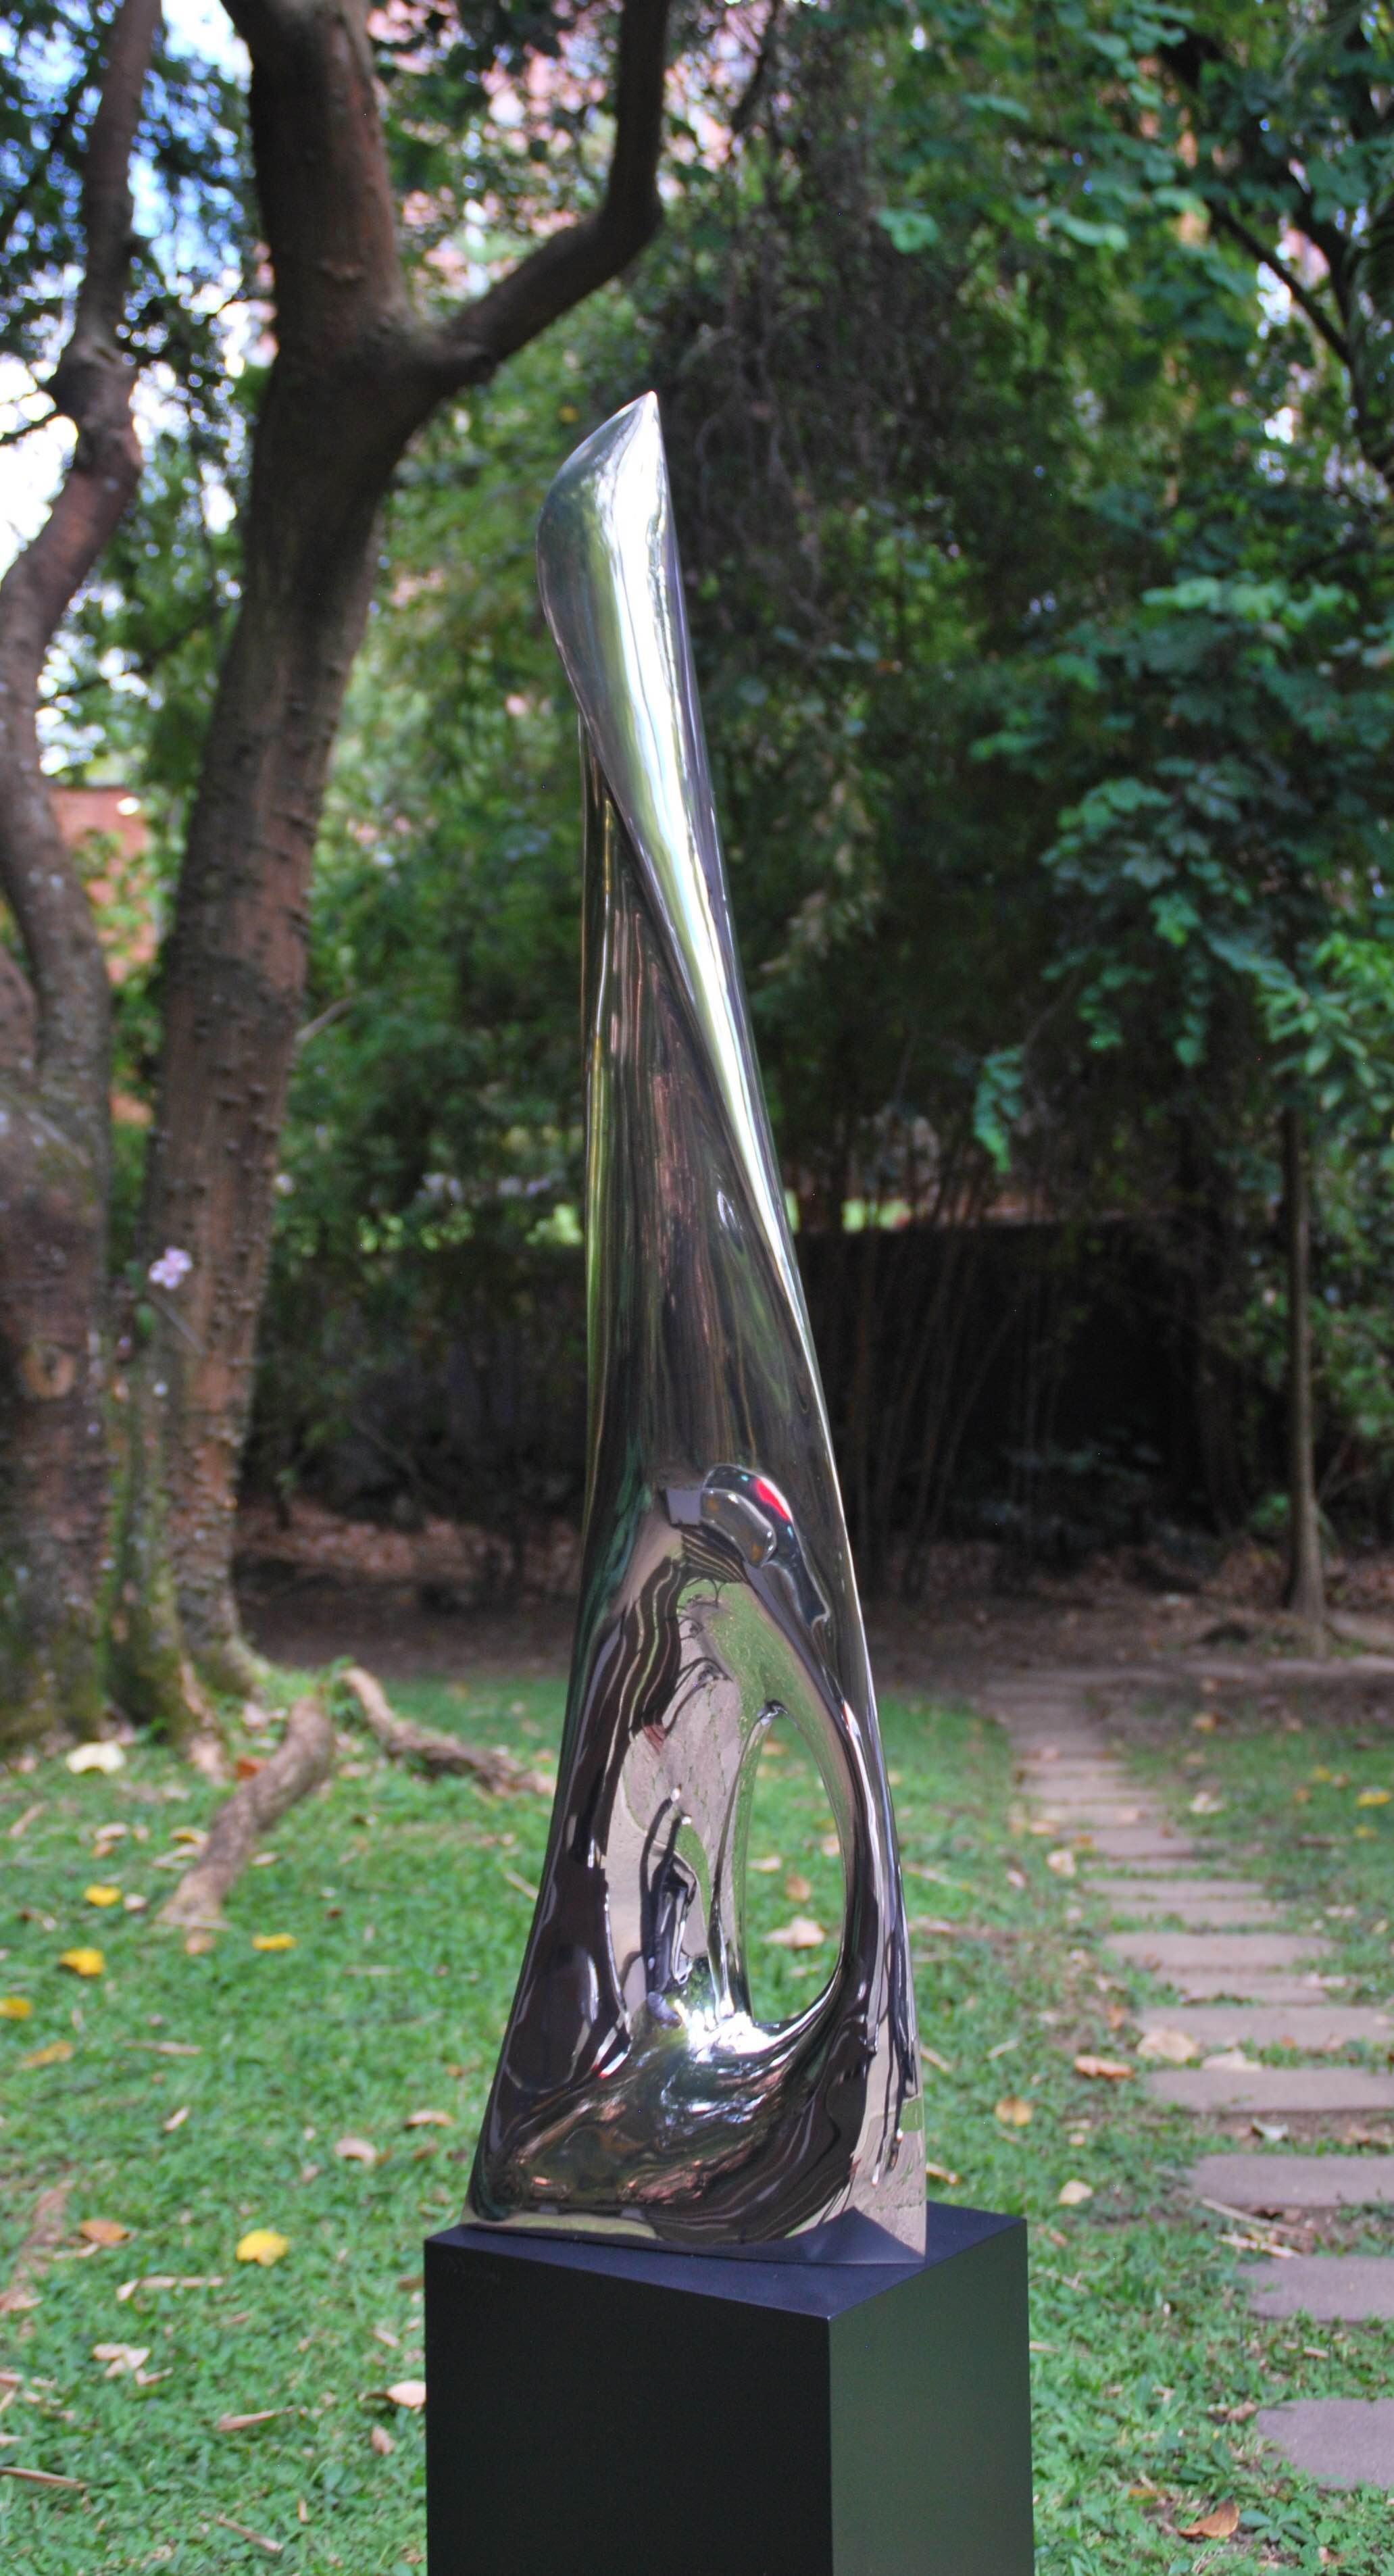 INSPIRATION OUTDOOR
Santiago Medina
ITALIAN STAINLESS STEEL
80 X 10.6 X 8 IN WITH BASE. BASE HEIGHT 27 IN.
Edition of 5

All sculptures are made with the highest quality Italian stainless steel available and imported from the Milan, Italy area. They